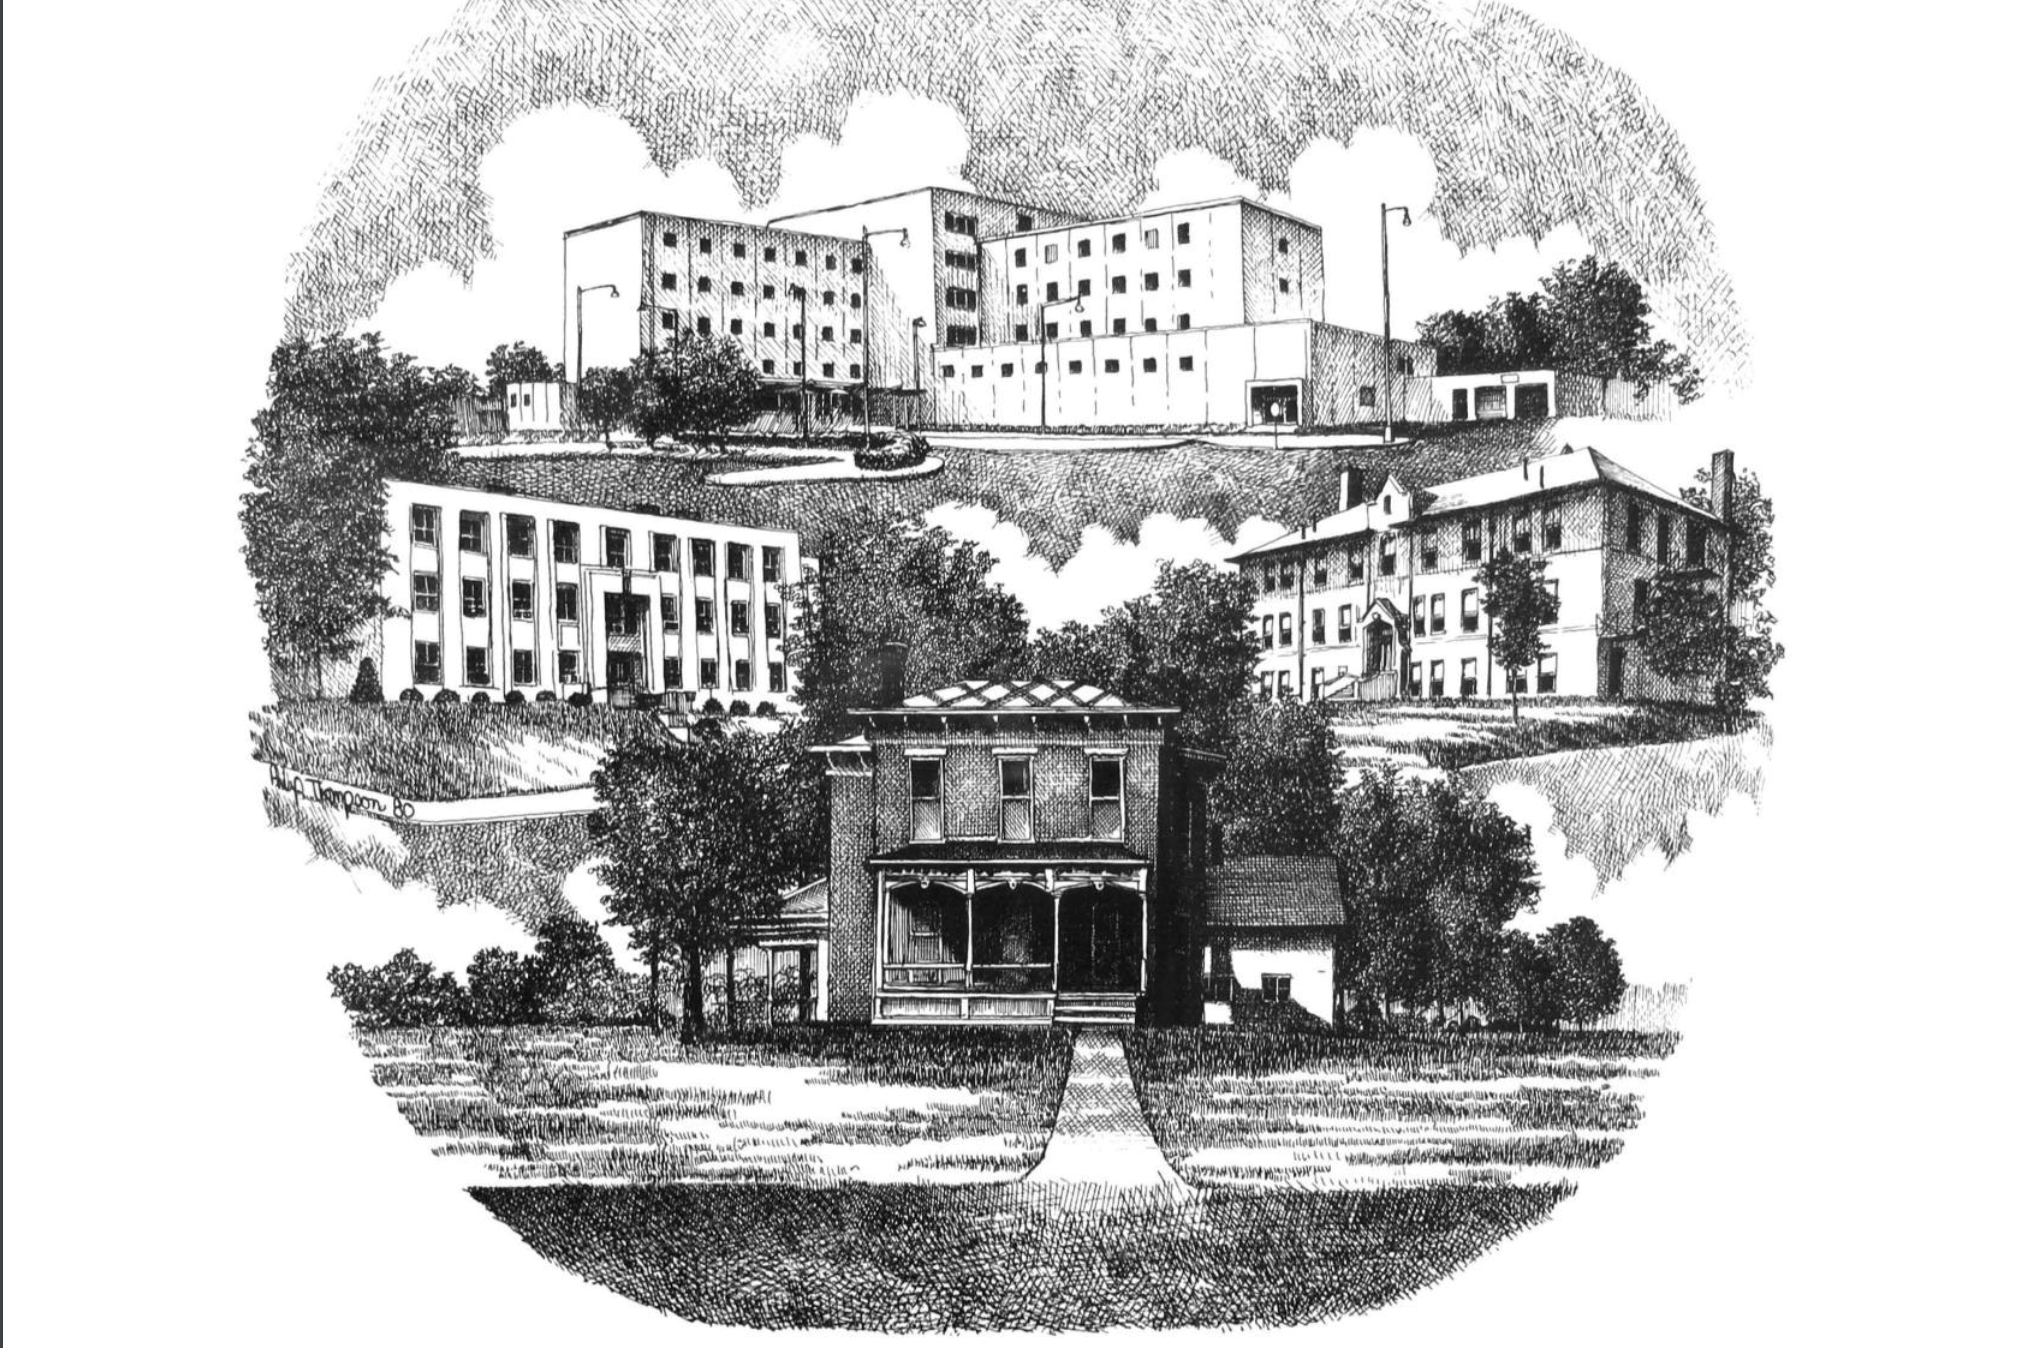 A sketch of the history of the Bloomington Hospital site.